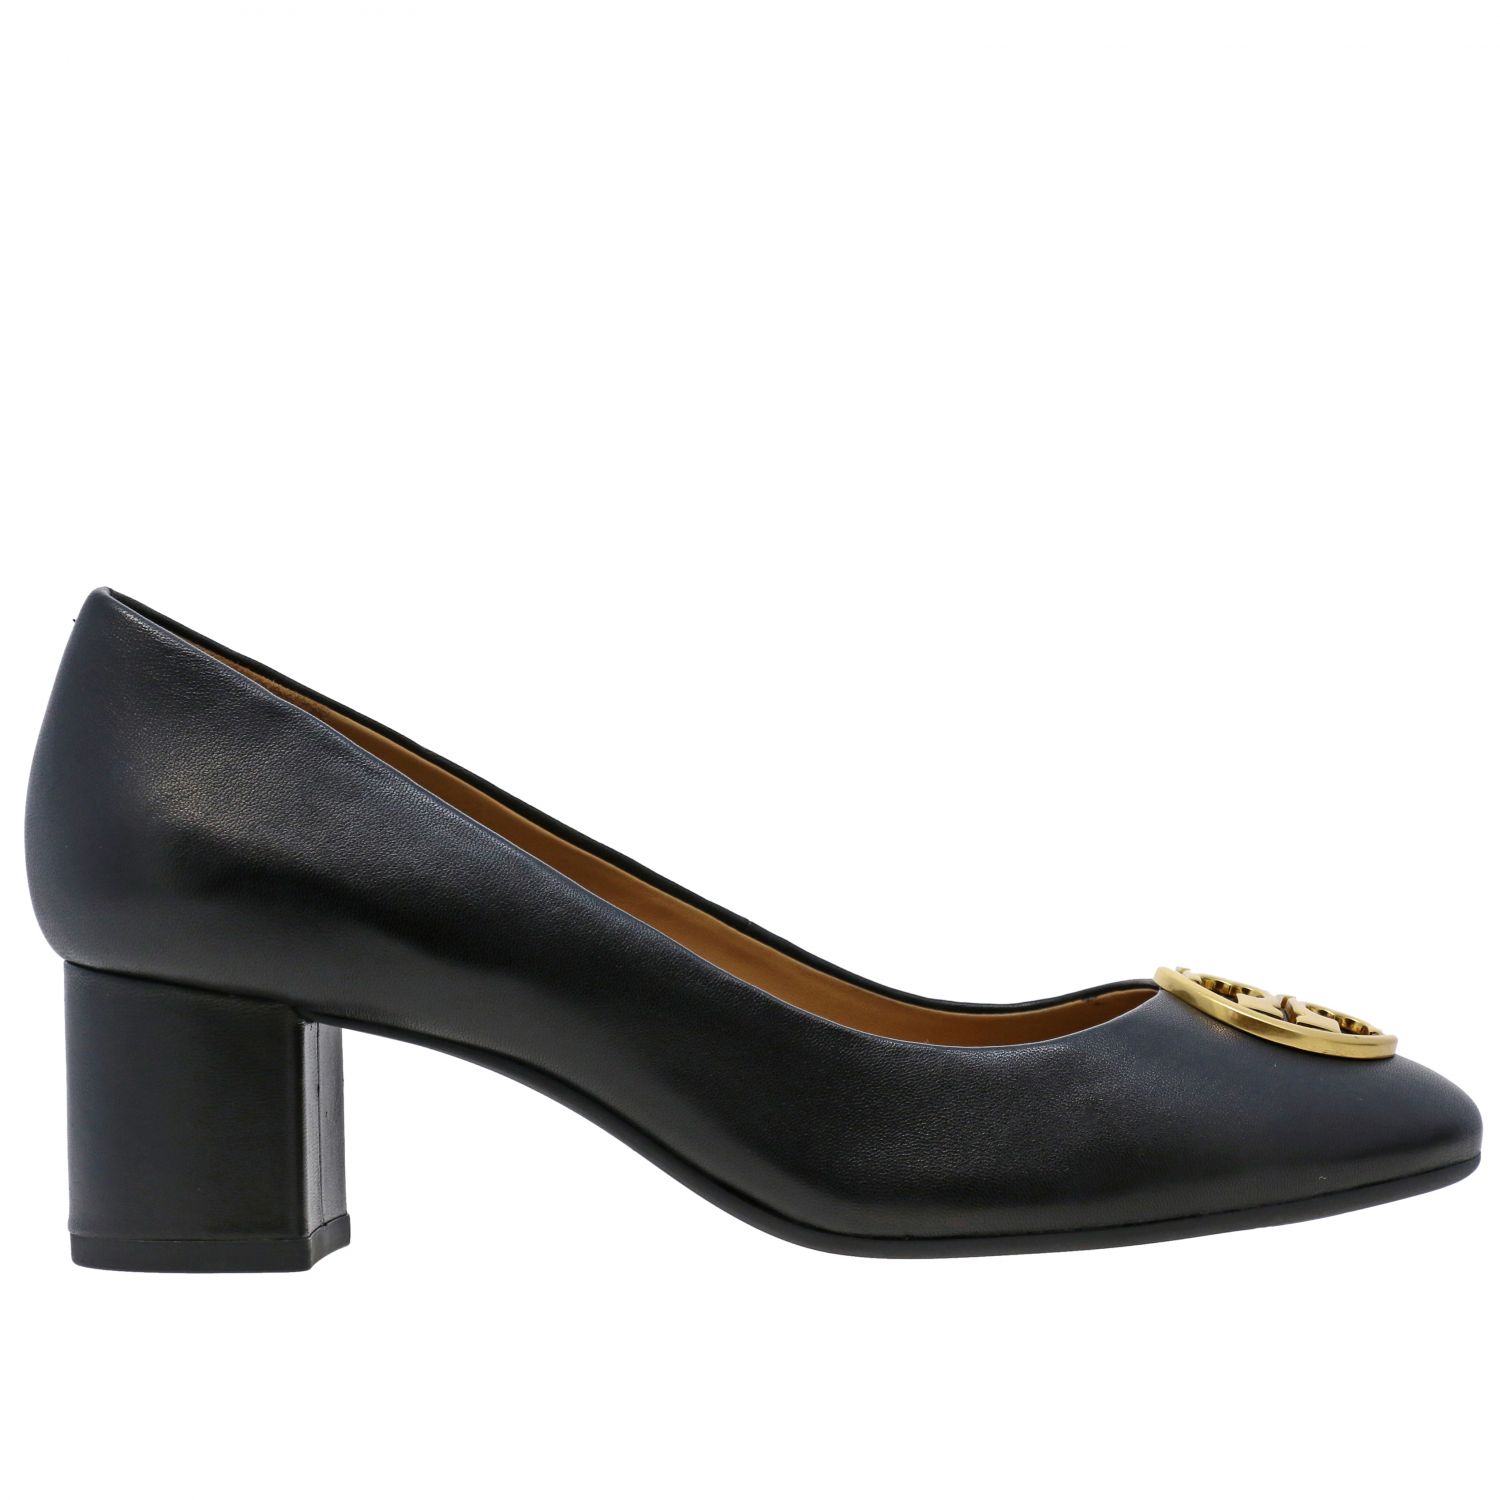 TORY BURCH: pumps for woman - Black | Tory Burch pumps 45900 online on ...